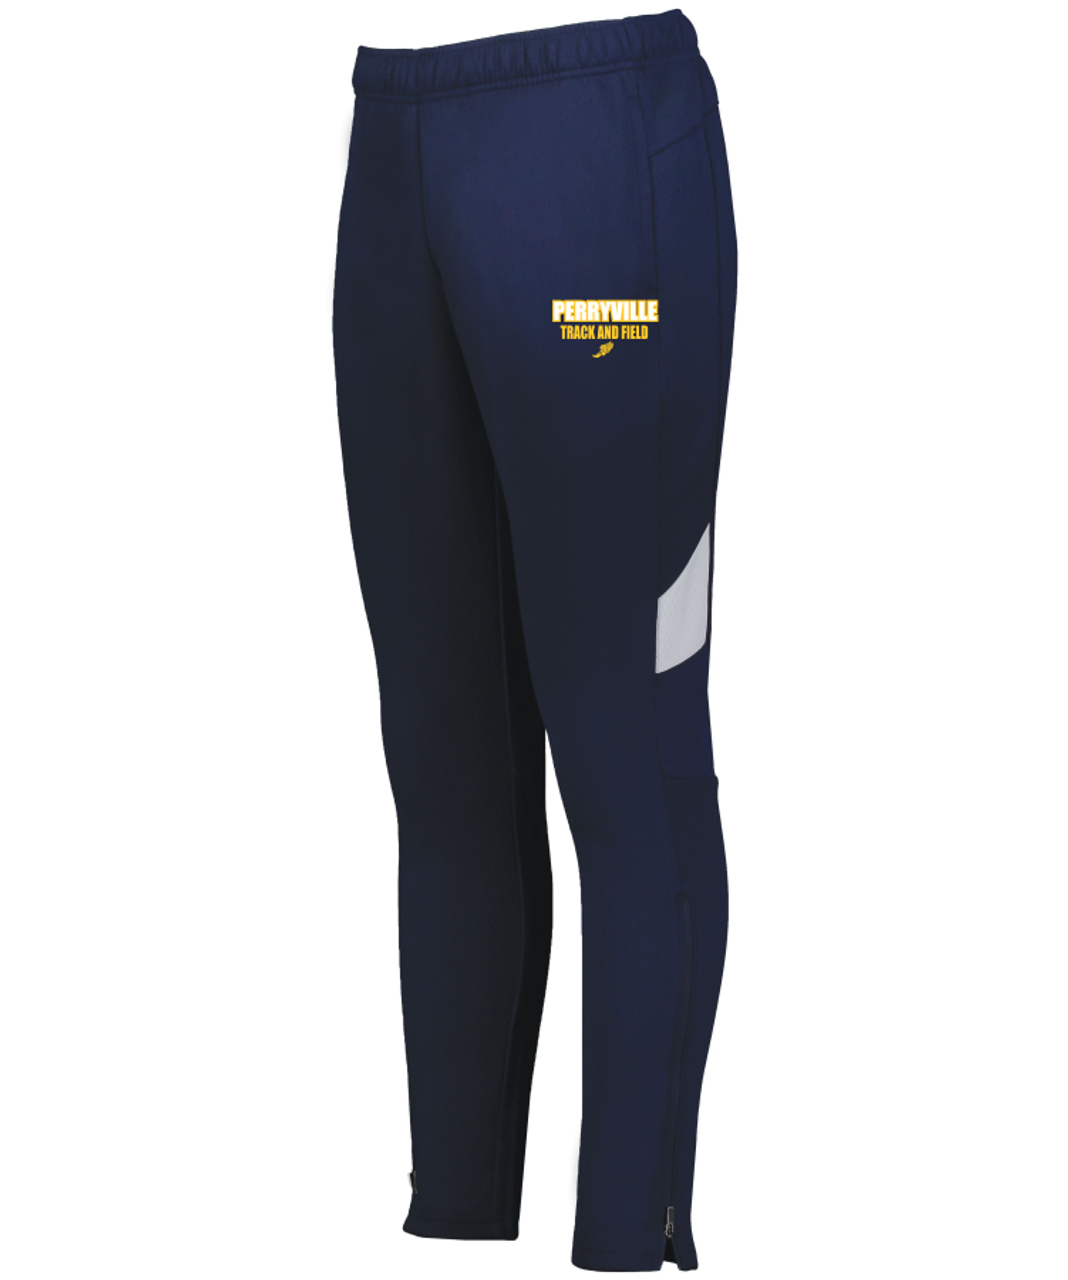 Perryville MS Track & Field Warm Up Pant